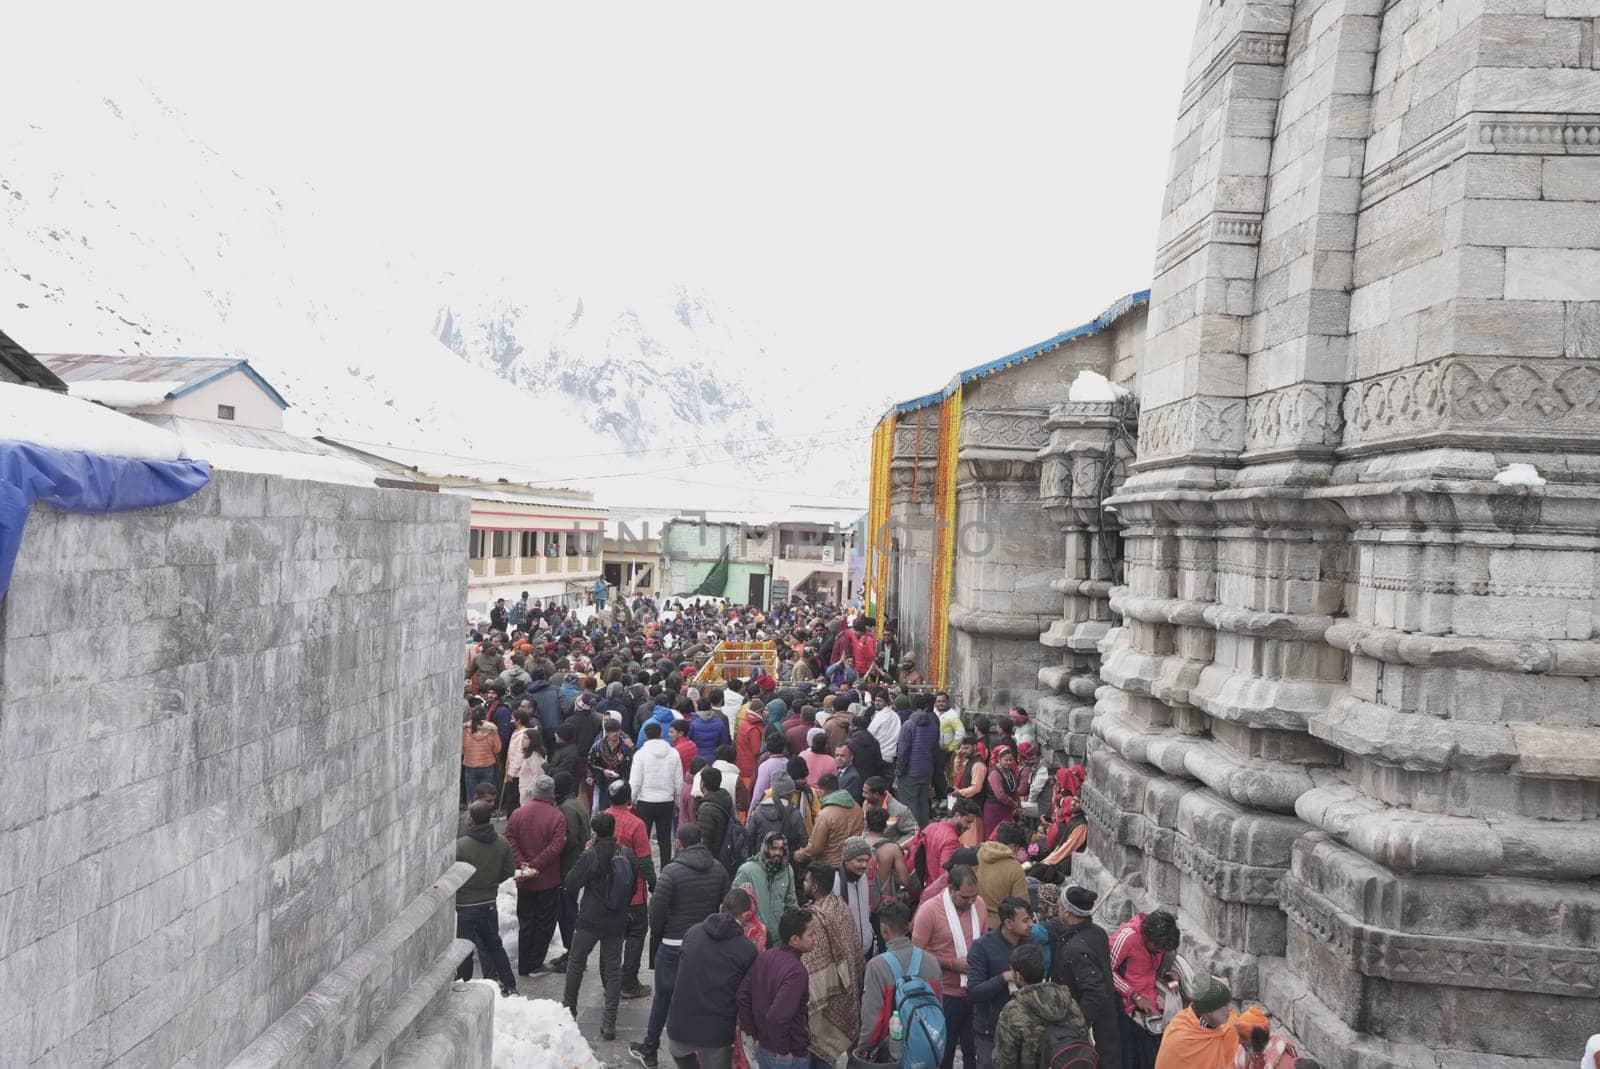 The Beauty of the Crowd at Kedarnath by stocksvids